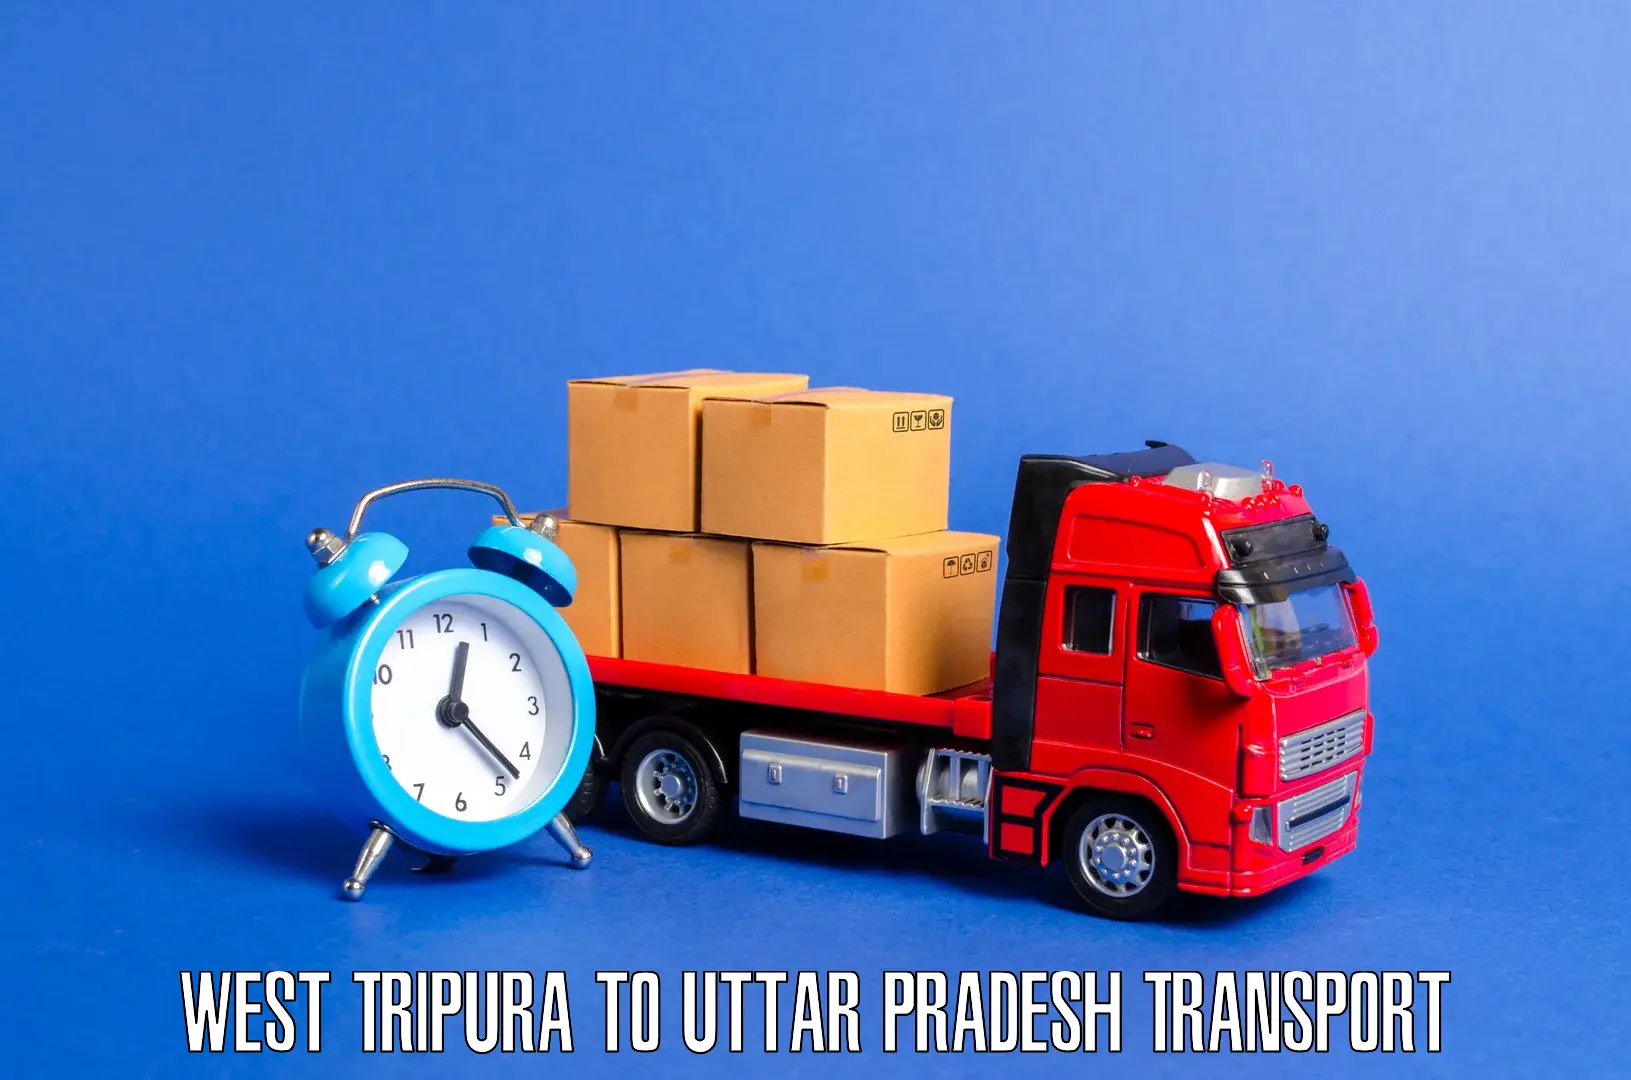 Nationwide transport services West Tripura to Agra